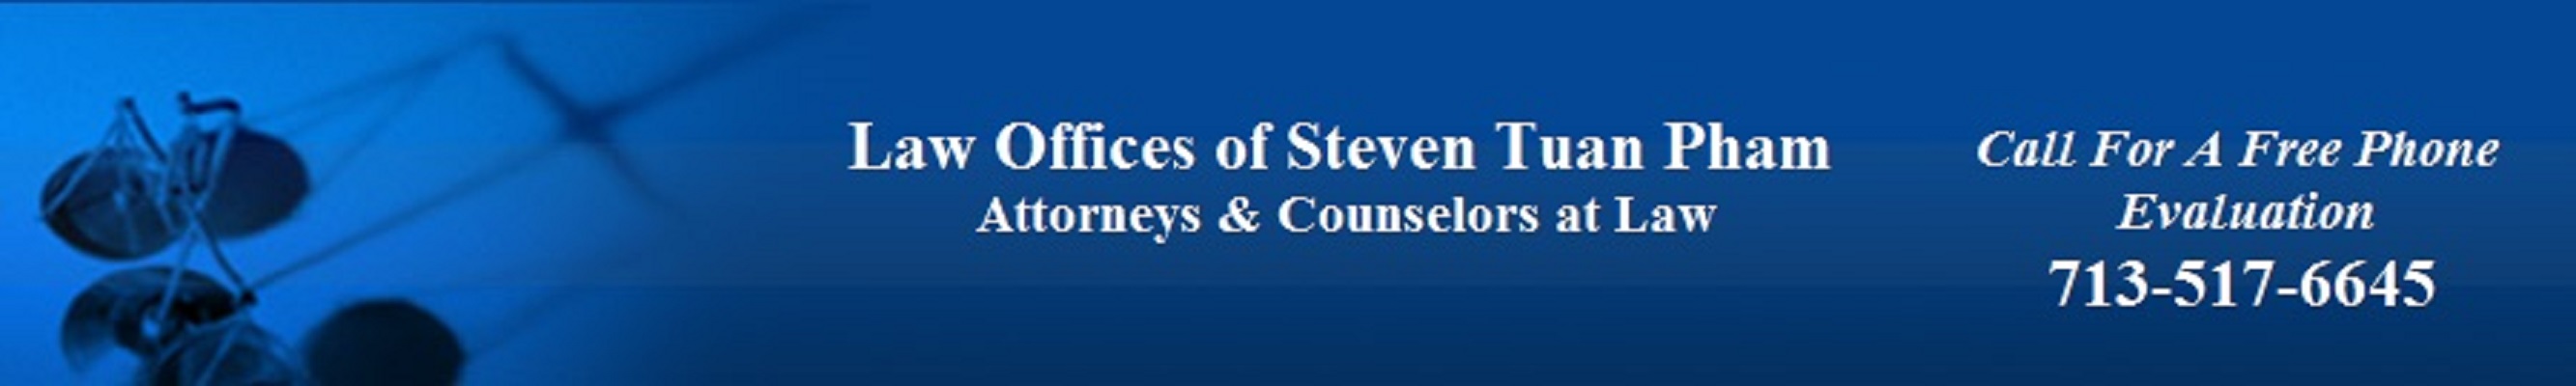 The Law Offices of Steven Tuan Pham - Houston Attorneys at Your Service